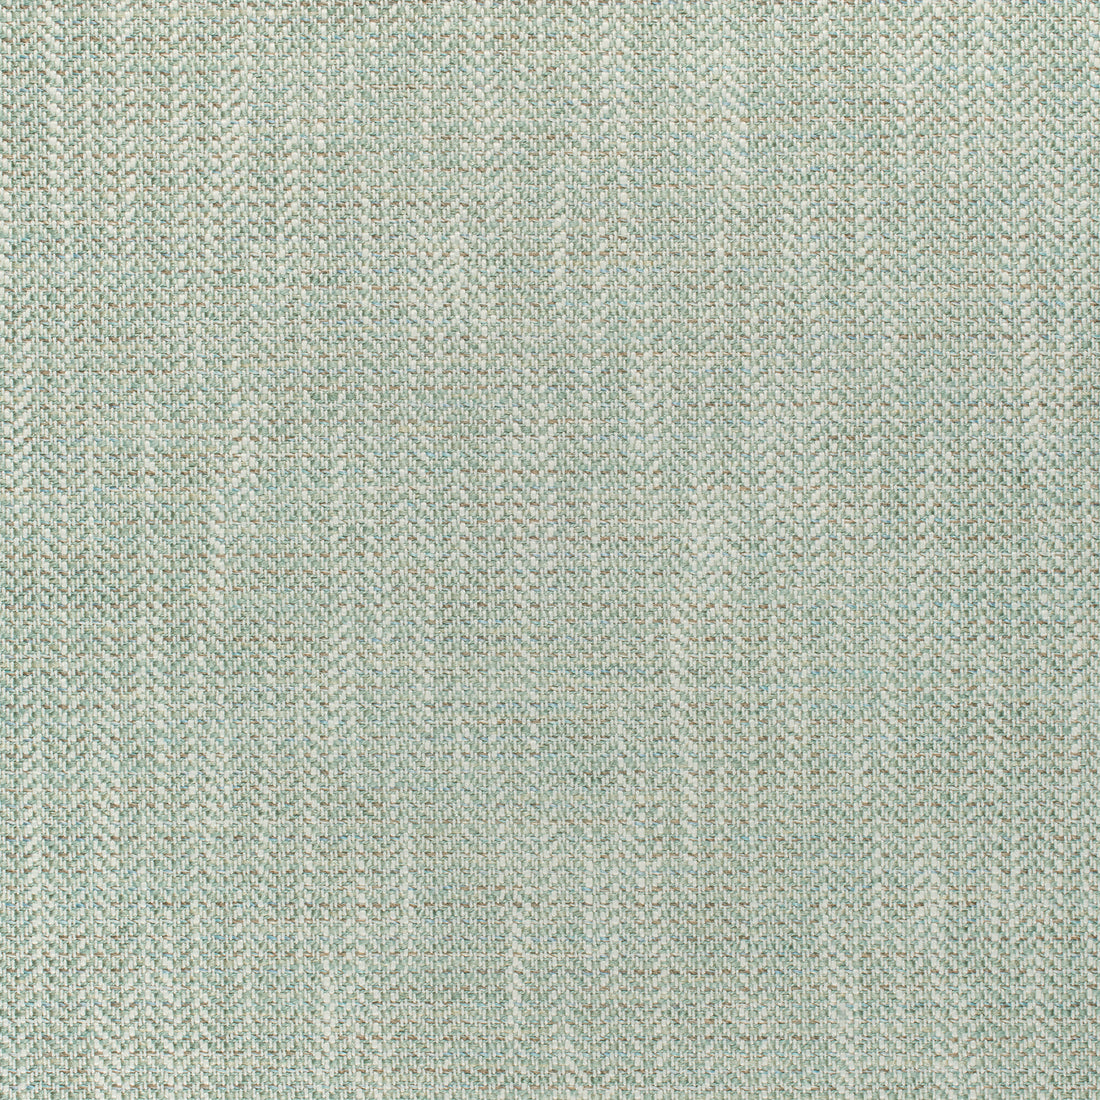 Ashbourne Tweed fabric in seafoam color - pattern number W80609 - by Thibaut in the Pinnacle collection